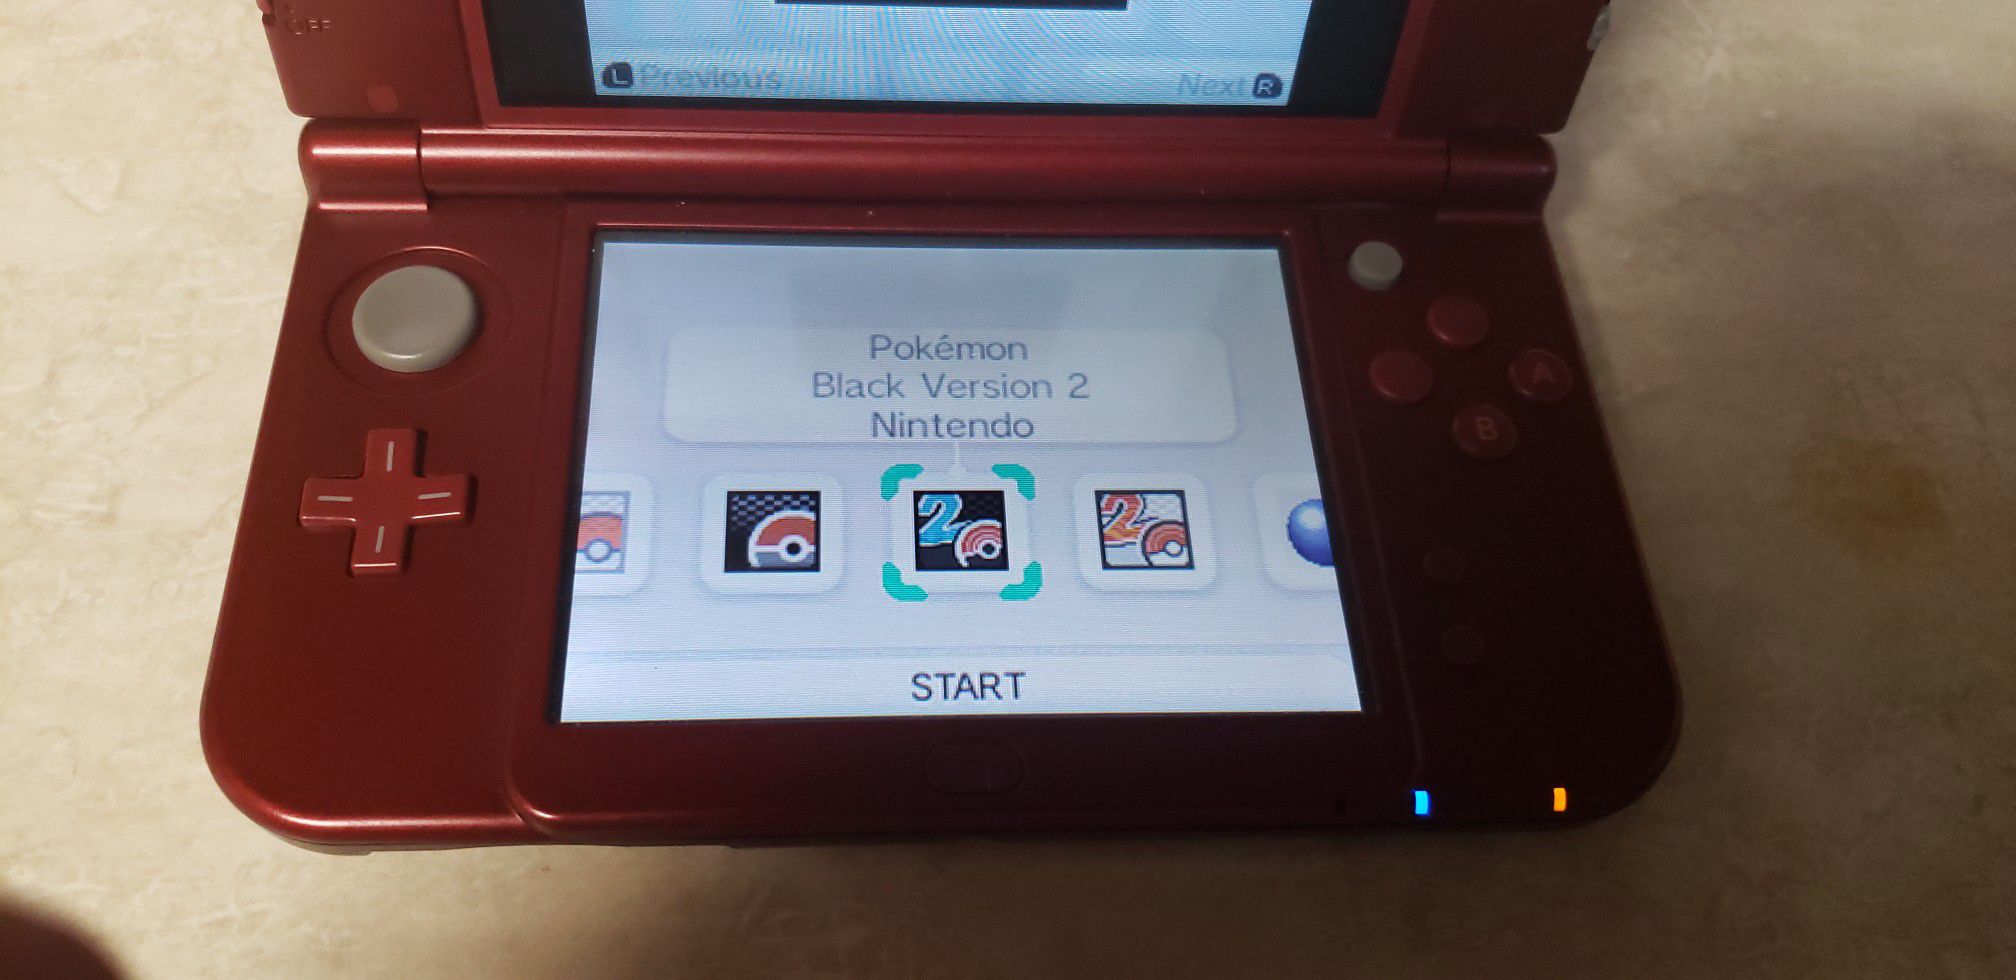 Modded Red New 3ds XL With Luma 9.0 B9S. With 24 3ds Games & 18 DS Games  Already Installed On 32 Gb Of Memory for Sale in Chico, CA - OfferUp